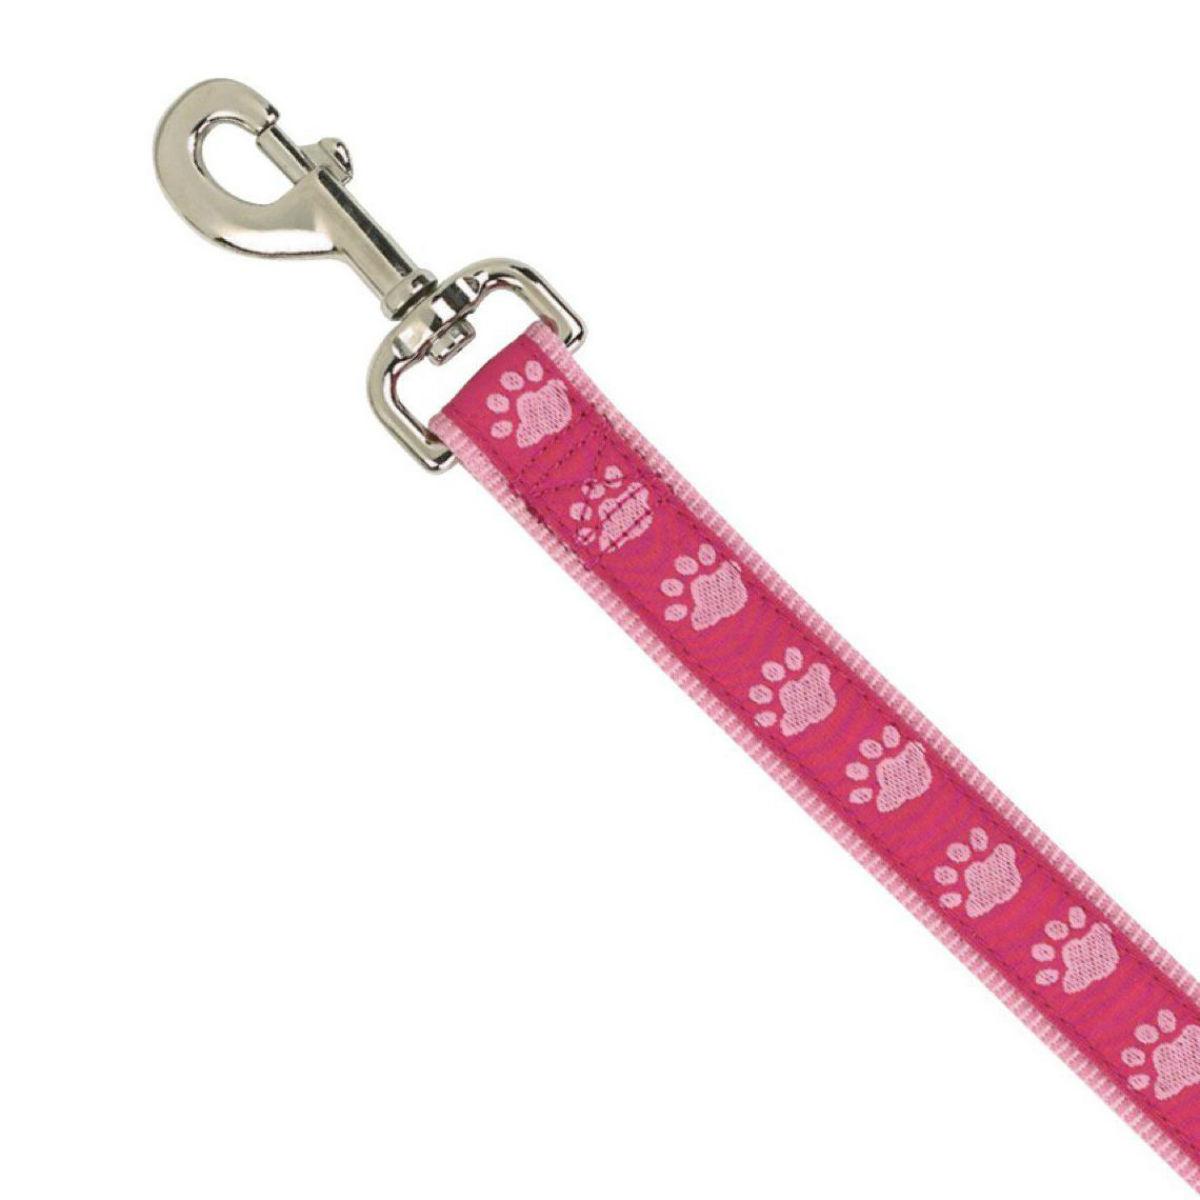 Pet Dog Leash pink with paw prints